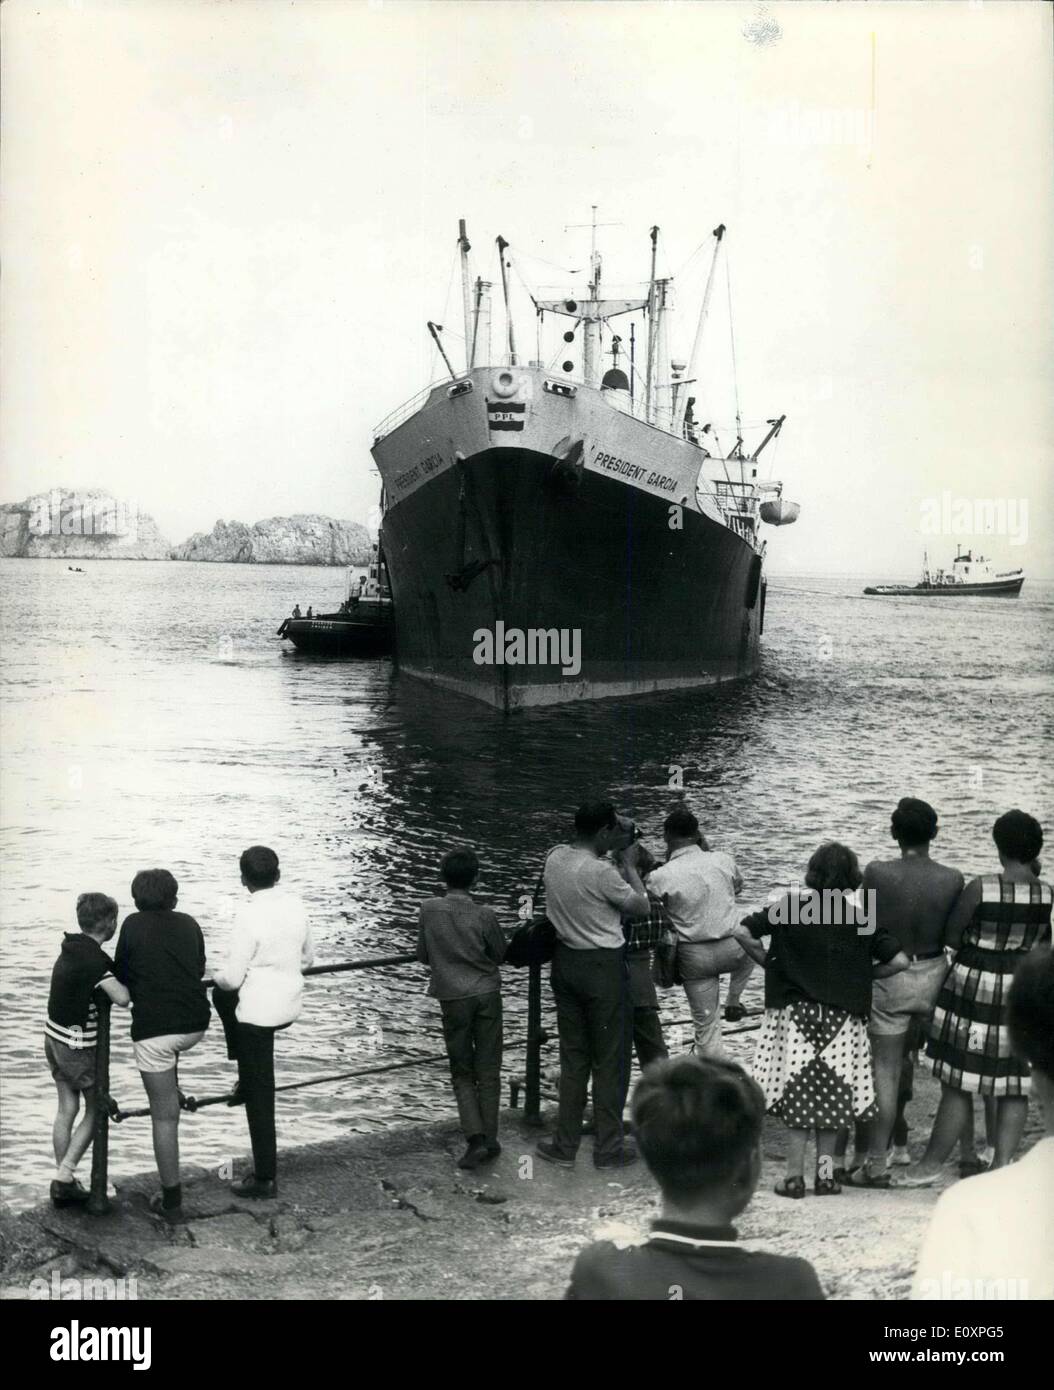 Jul. 22, 1967 - Stranded Car Ship Freed In Guernsey: The Philippine cargo ship President Garcia which was aground for a week, was successfully towed off the rocks at Saint's Bay, Guernsey by three Dutch tugs on Thursday evening. The tugs, two at sea and one alongside, took an hour to slowly shift the ship. Scores of holidaymakers watched the operation and cheered the crew as the ship was pulled off. Photo shows Holidaymakers look as the ship is pulled off the rocks at Saint's Bay Guernsey. Stock Photo